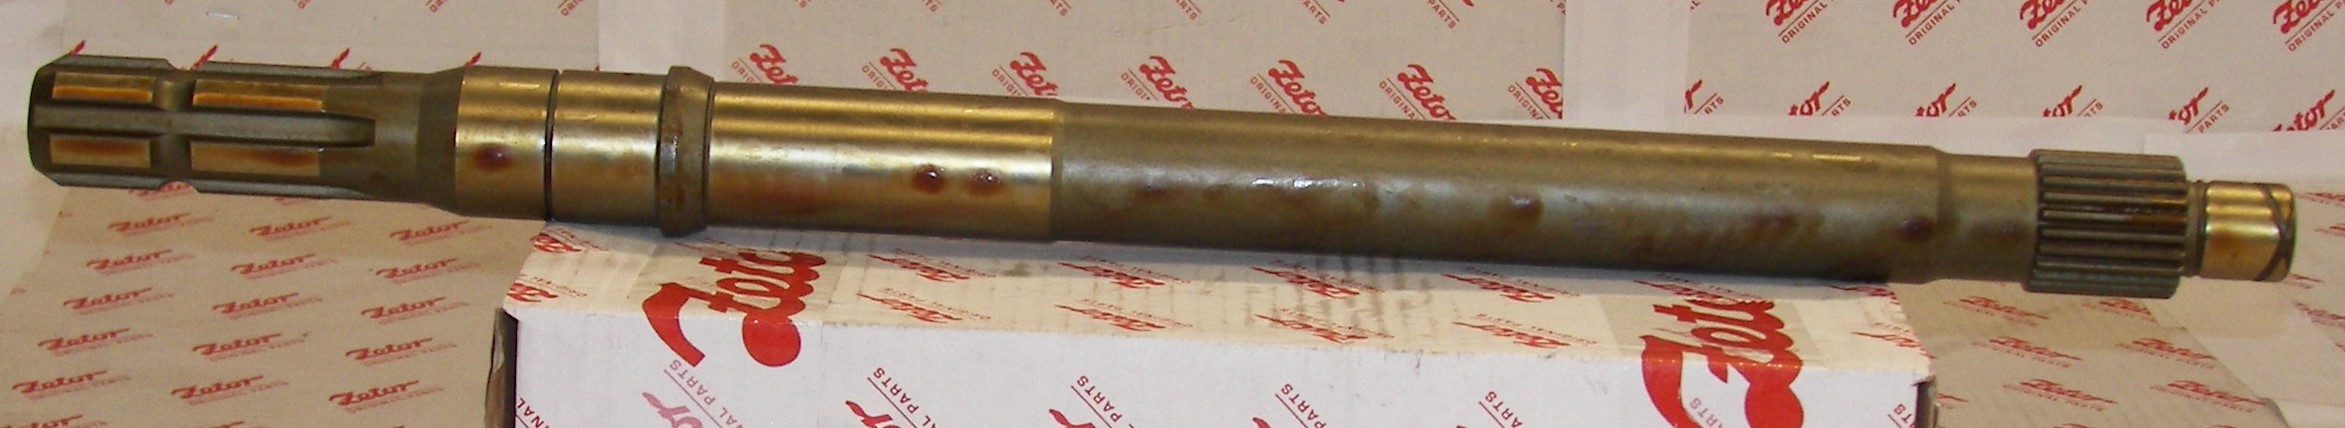 PTO SHAFT, REAR, WITH FRONT FINE SPLINES ON THE SHAFT 1-1/2" LONG